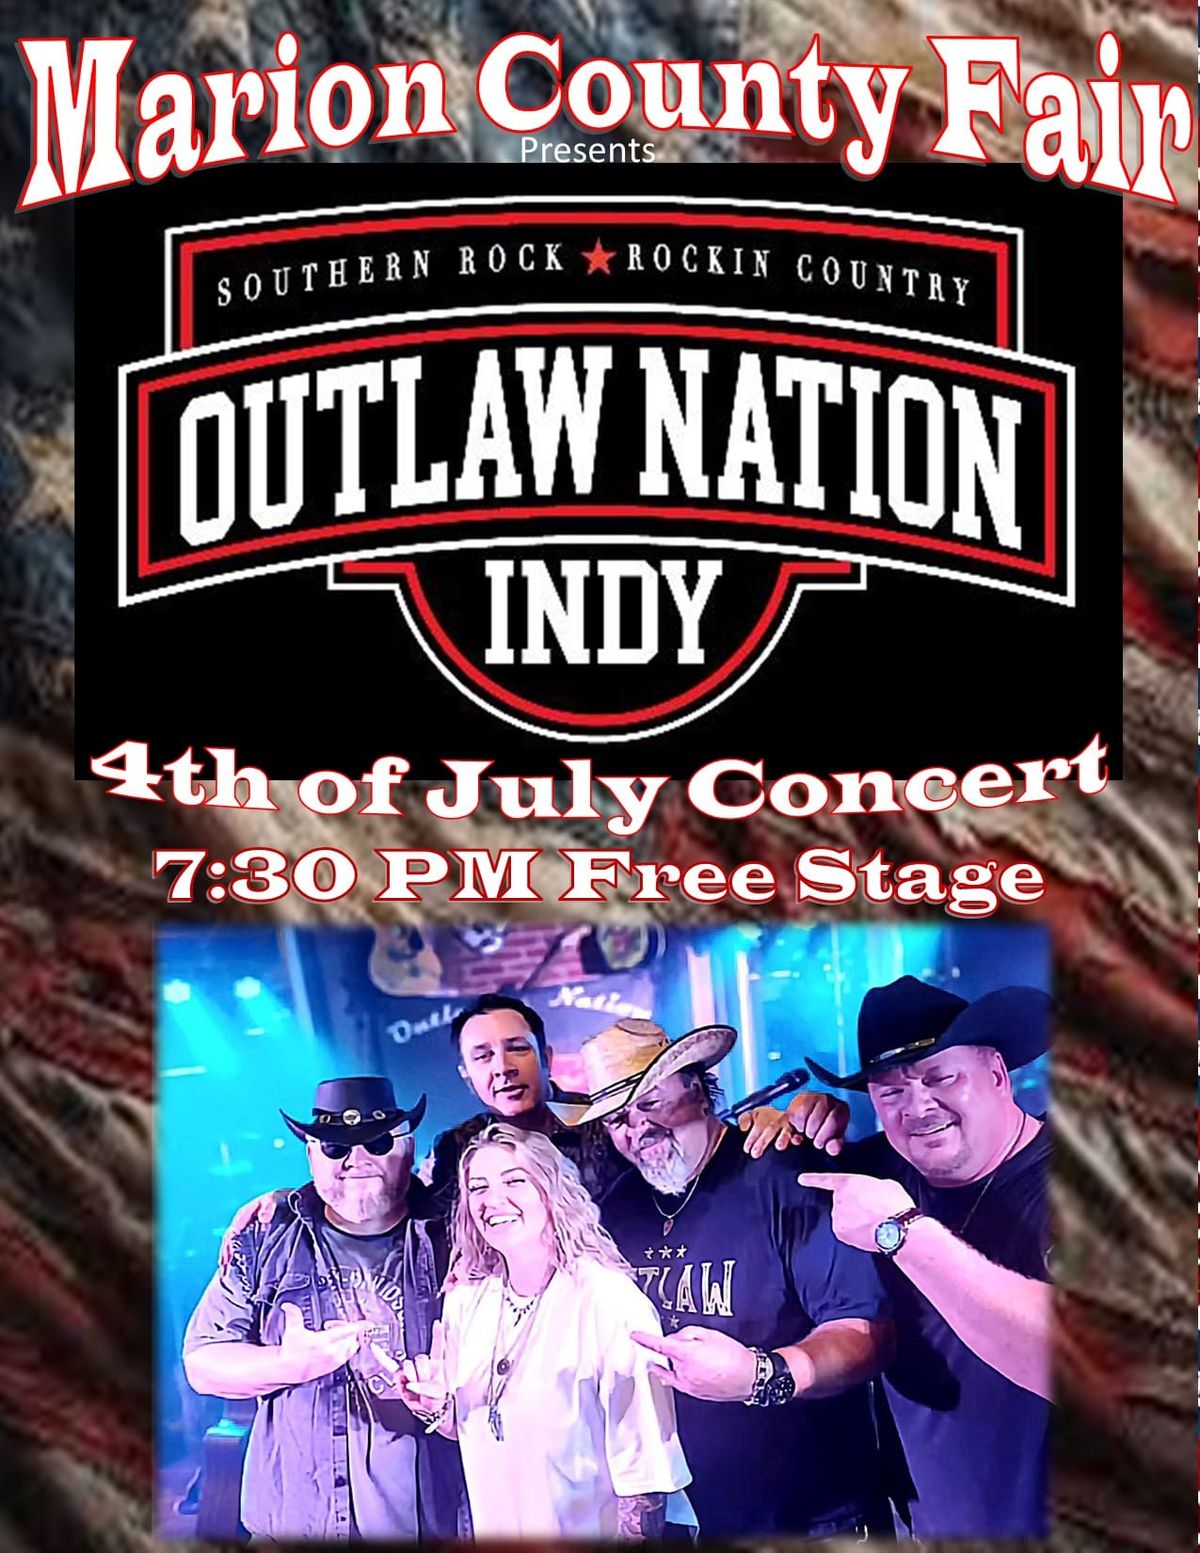 Marion County Fair presents Outlaw Nation Indy